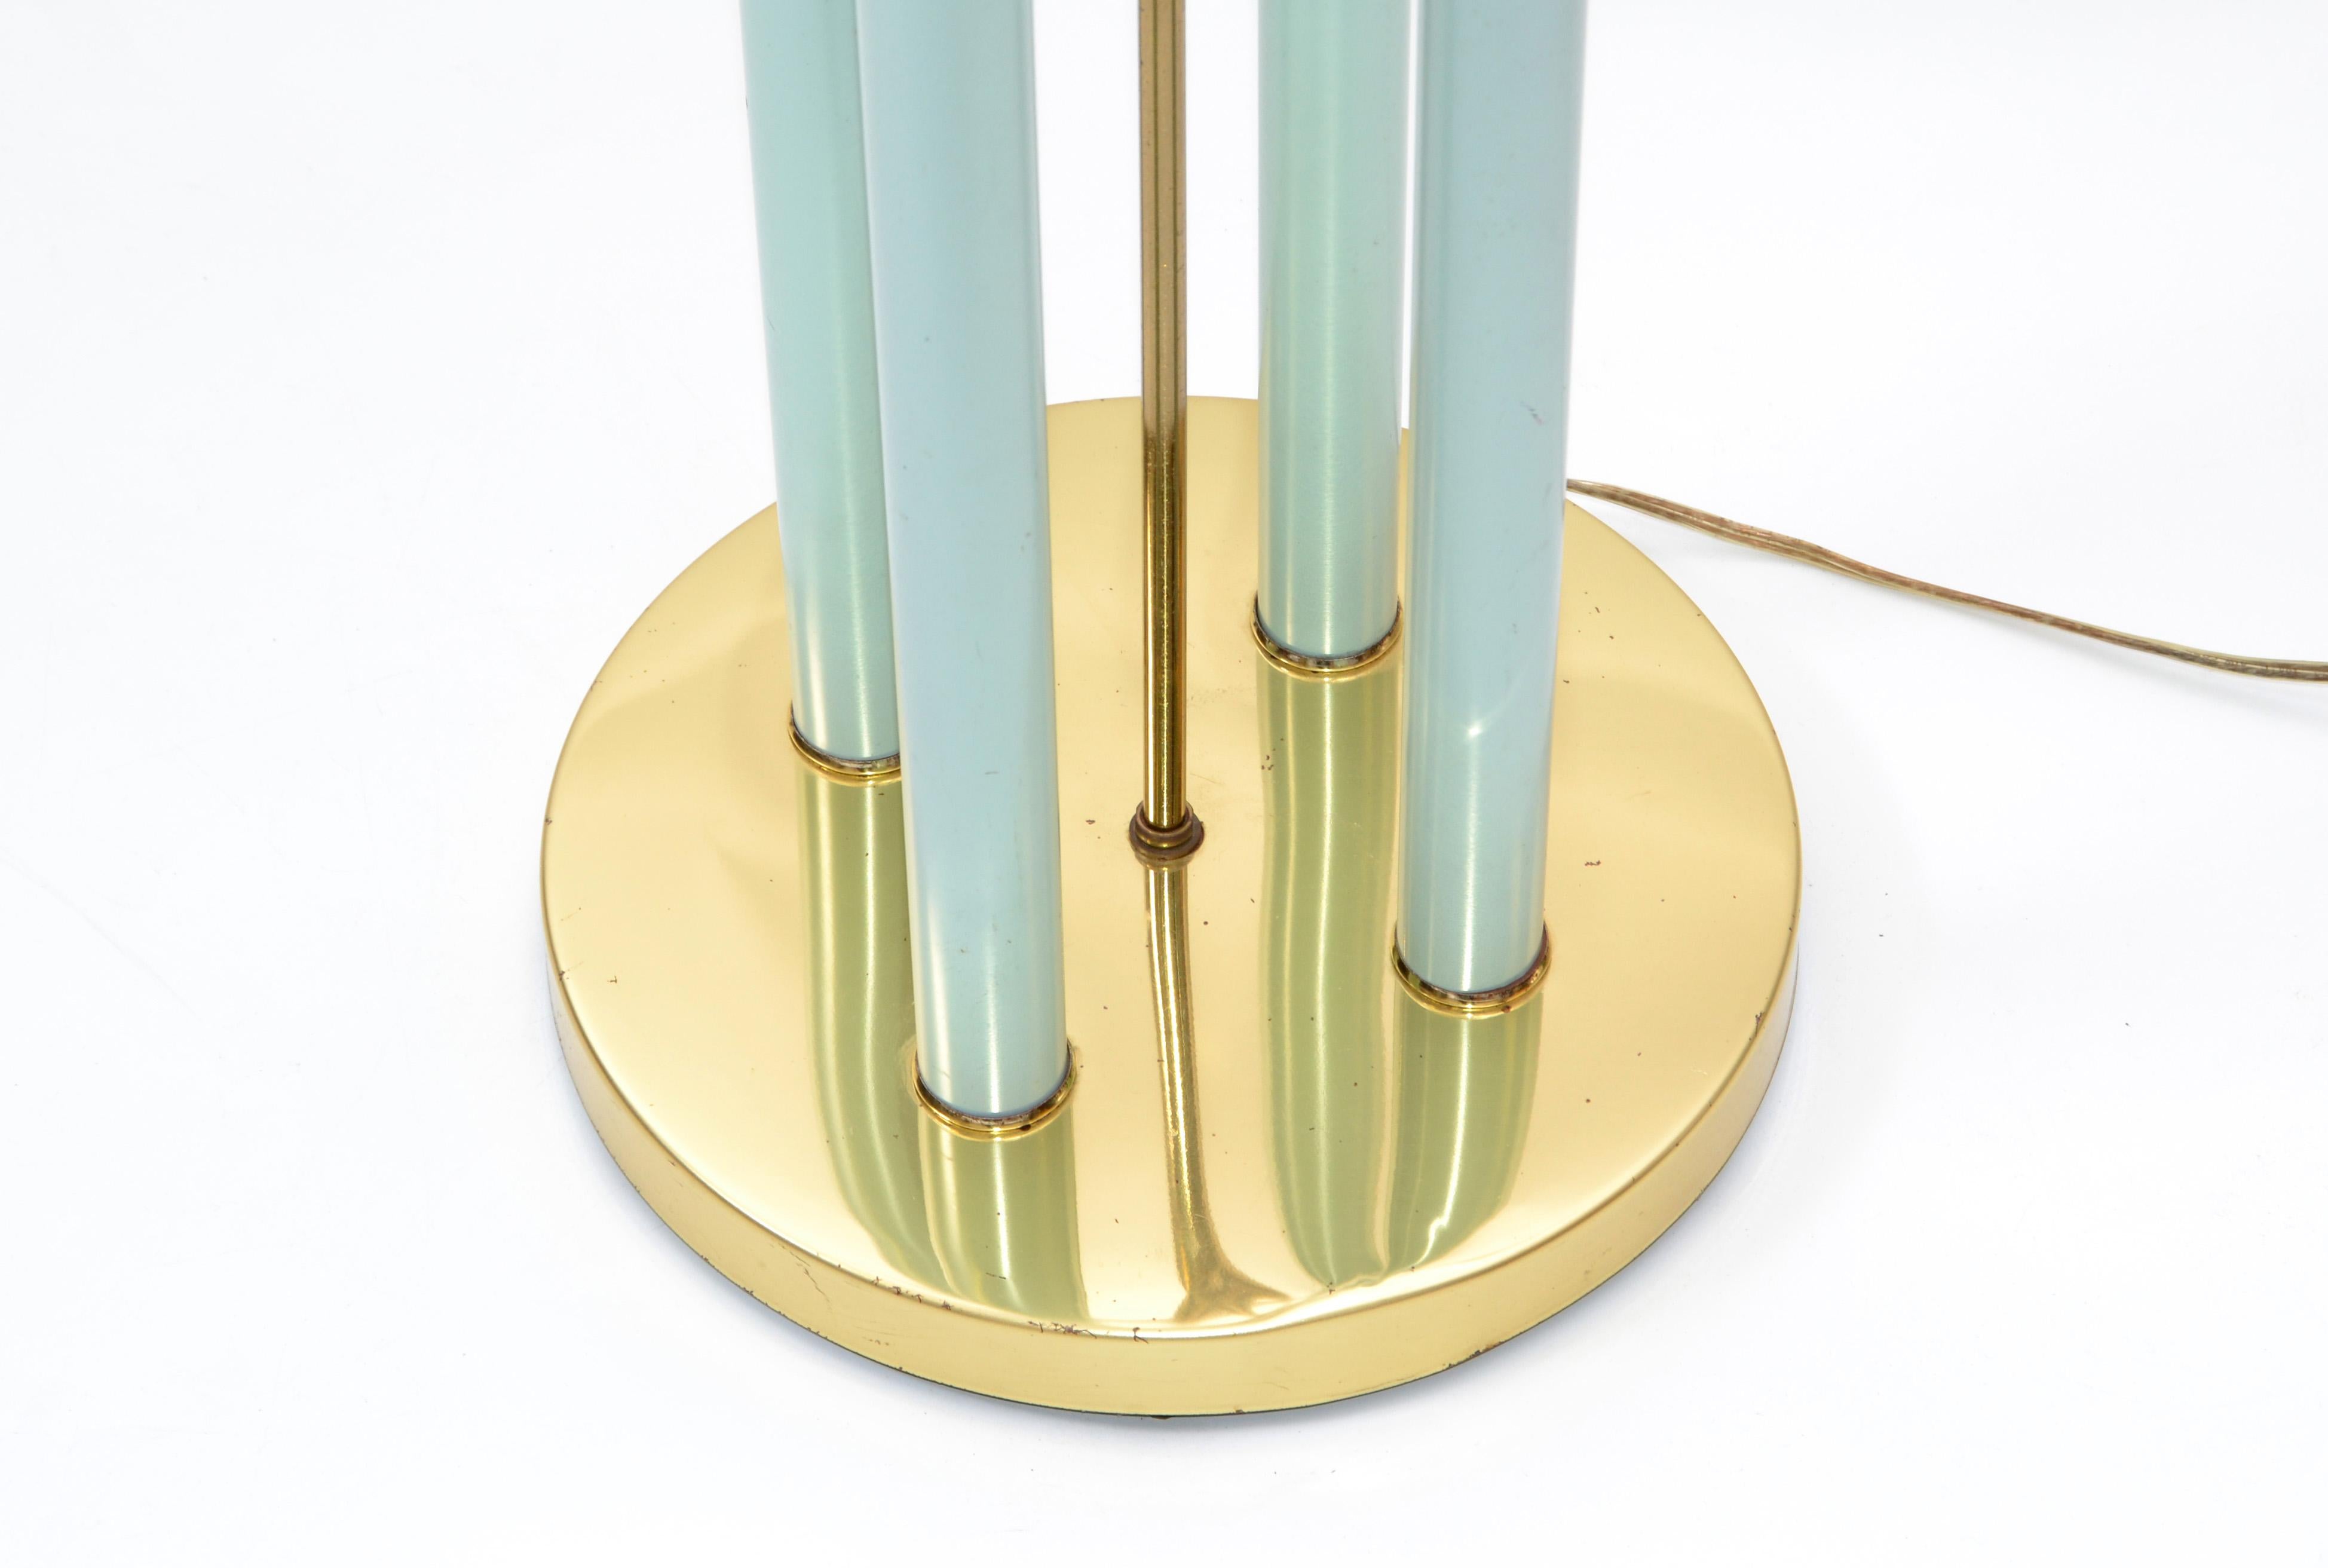 Late 20th Century Mid-Century Modern Brass-Plated and Turquoise Enamel Finish Floor Lamp For Sale